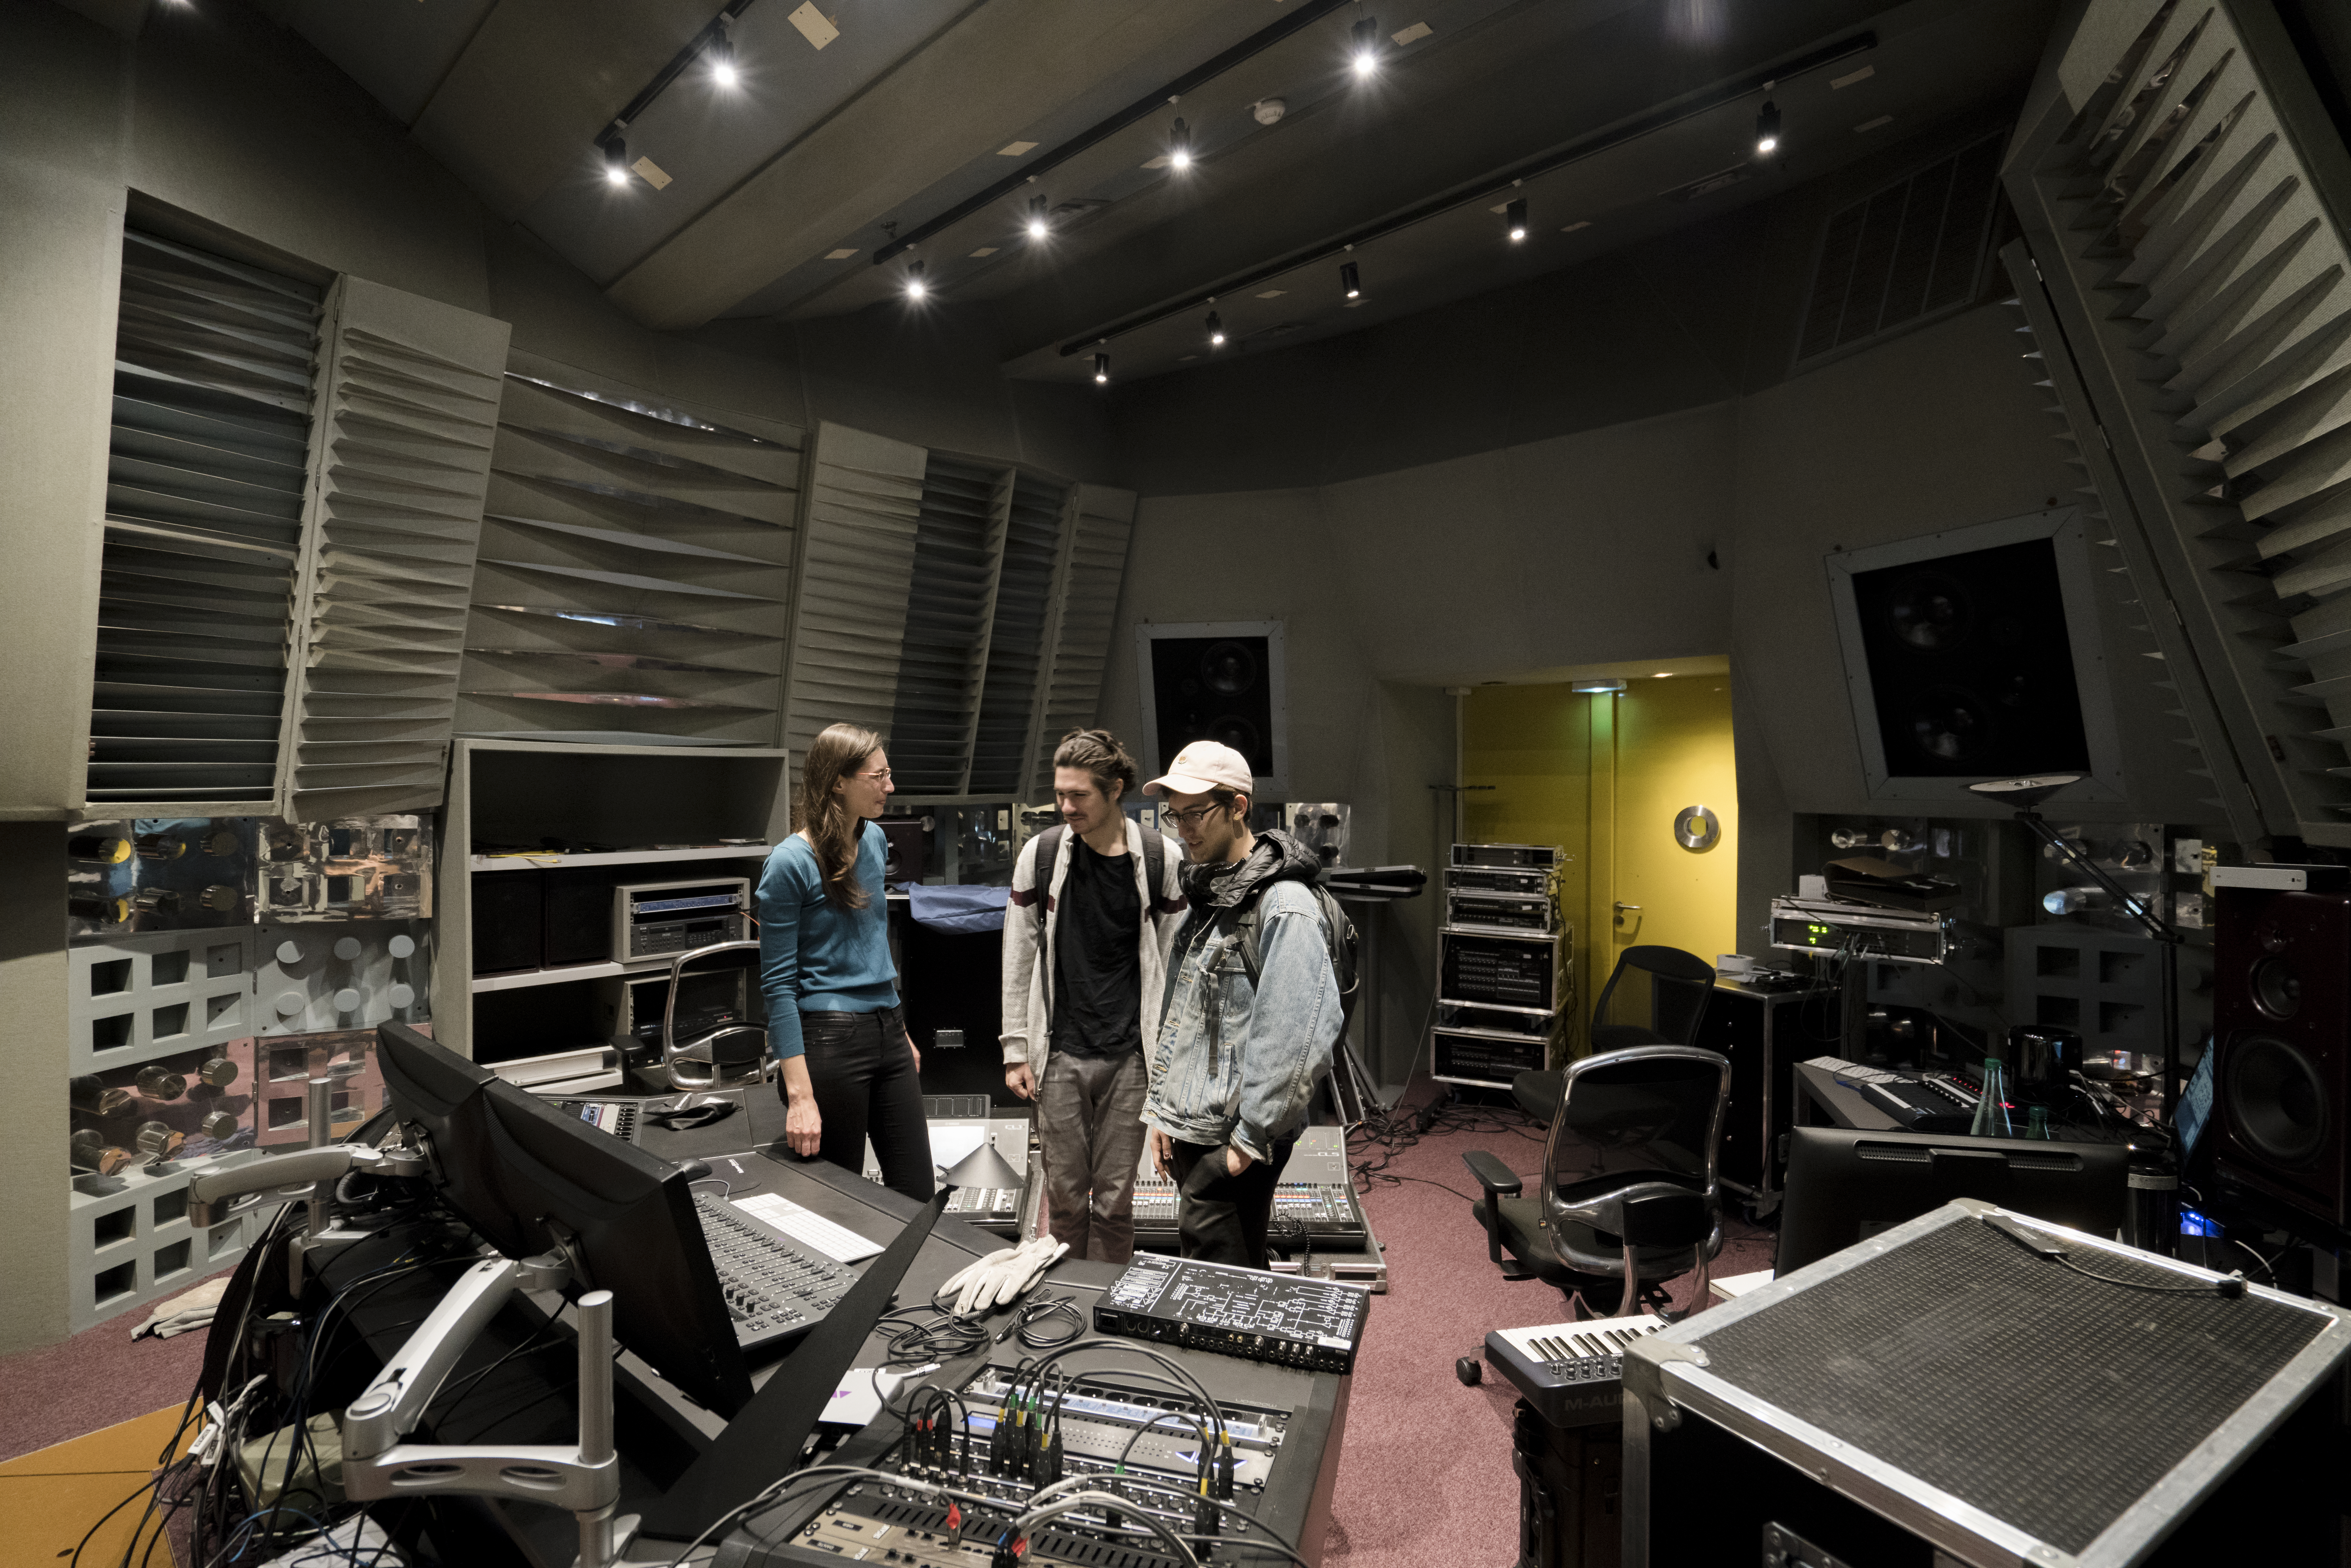 Students standing in a music recording space.